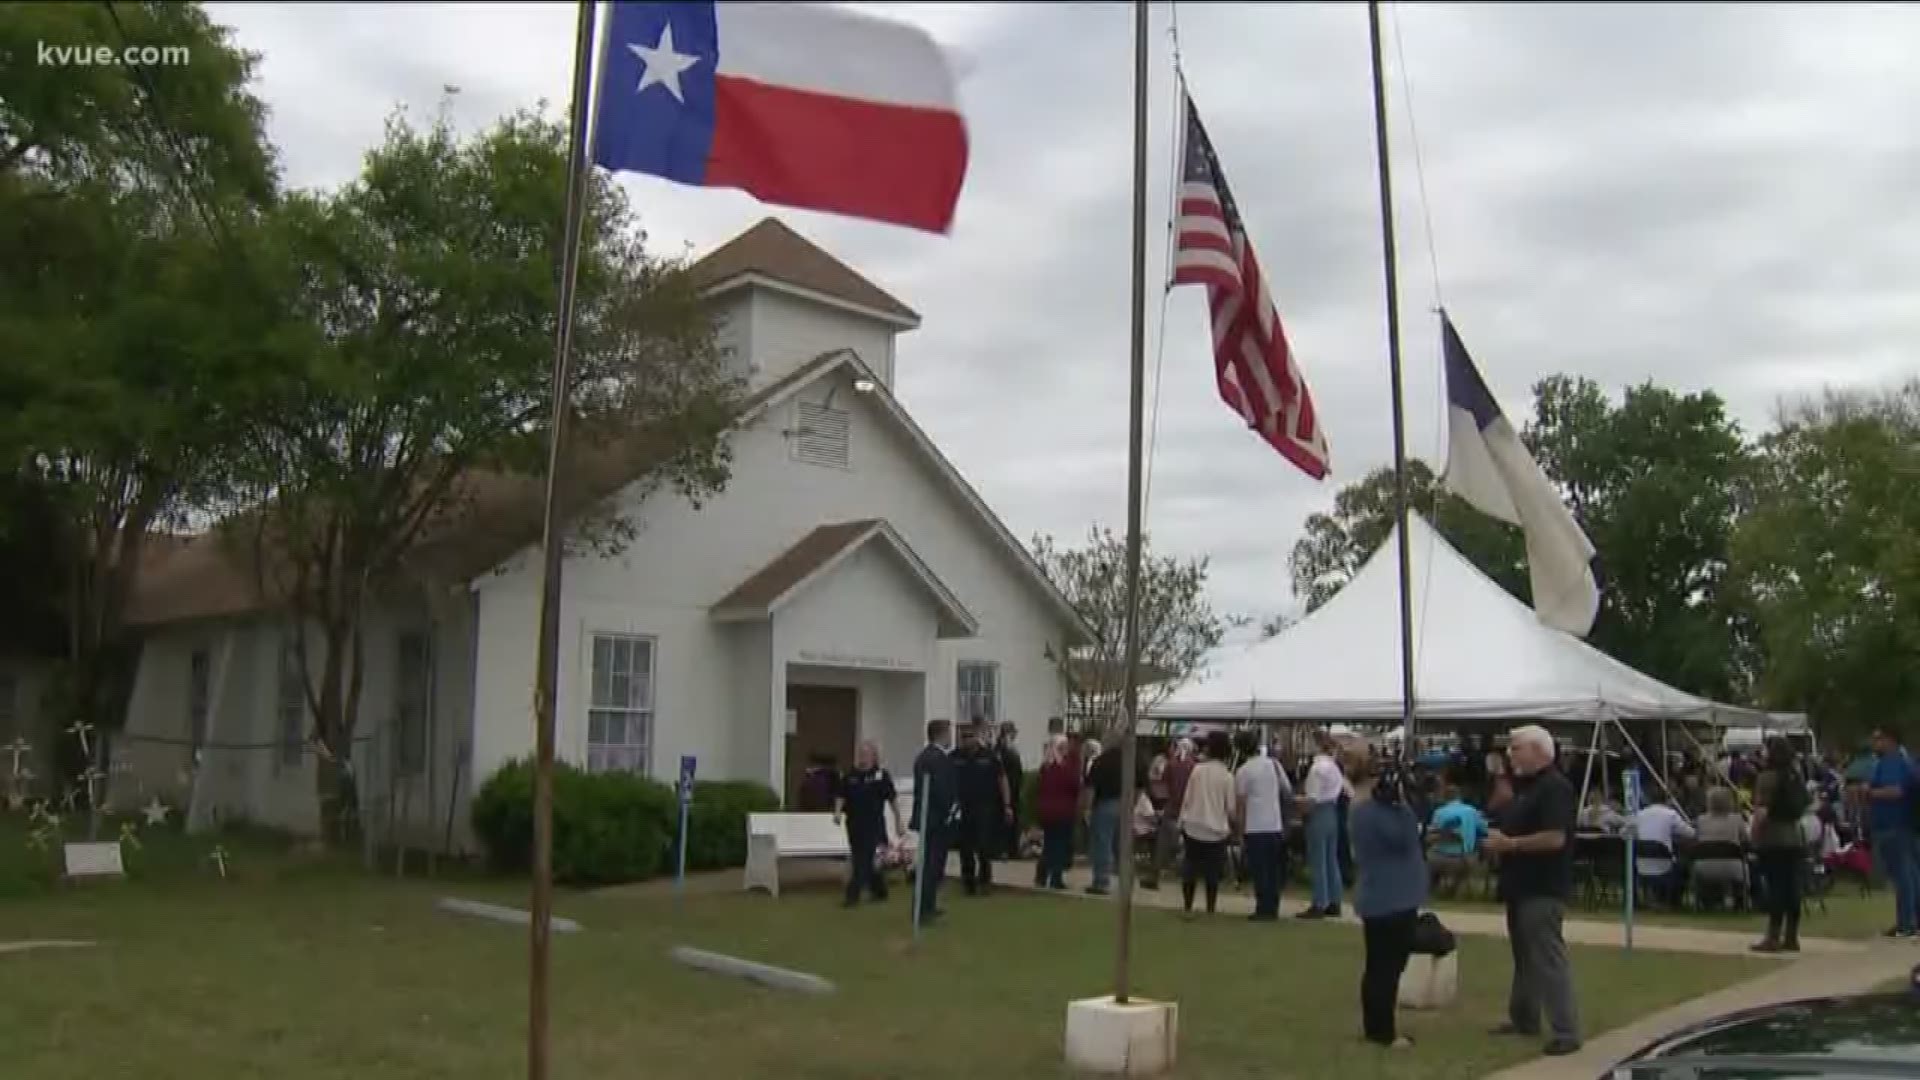 The Sutherland Springs pastor who lost his daughter in the deadly 2017 attack on his church plans to run for State Senator in 2020.